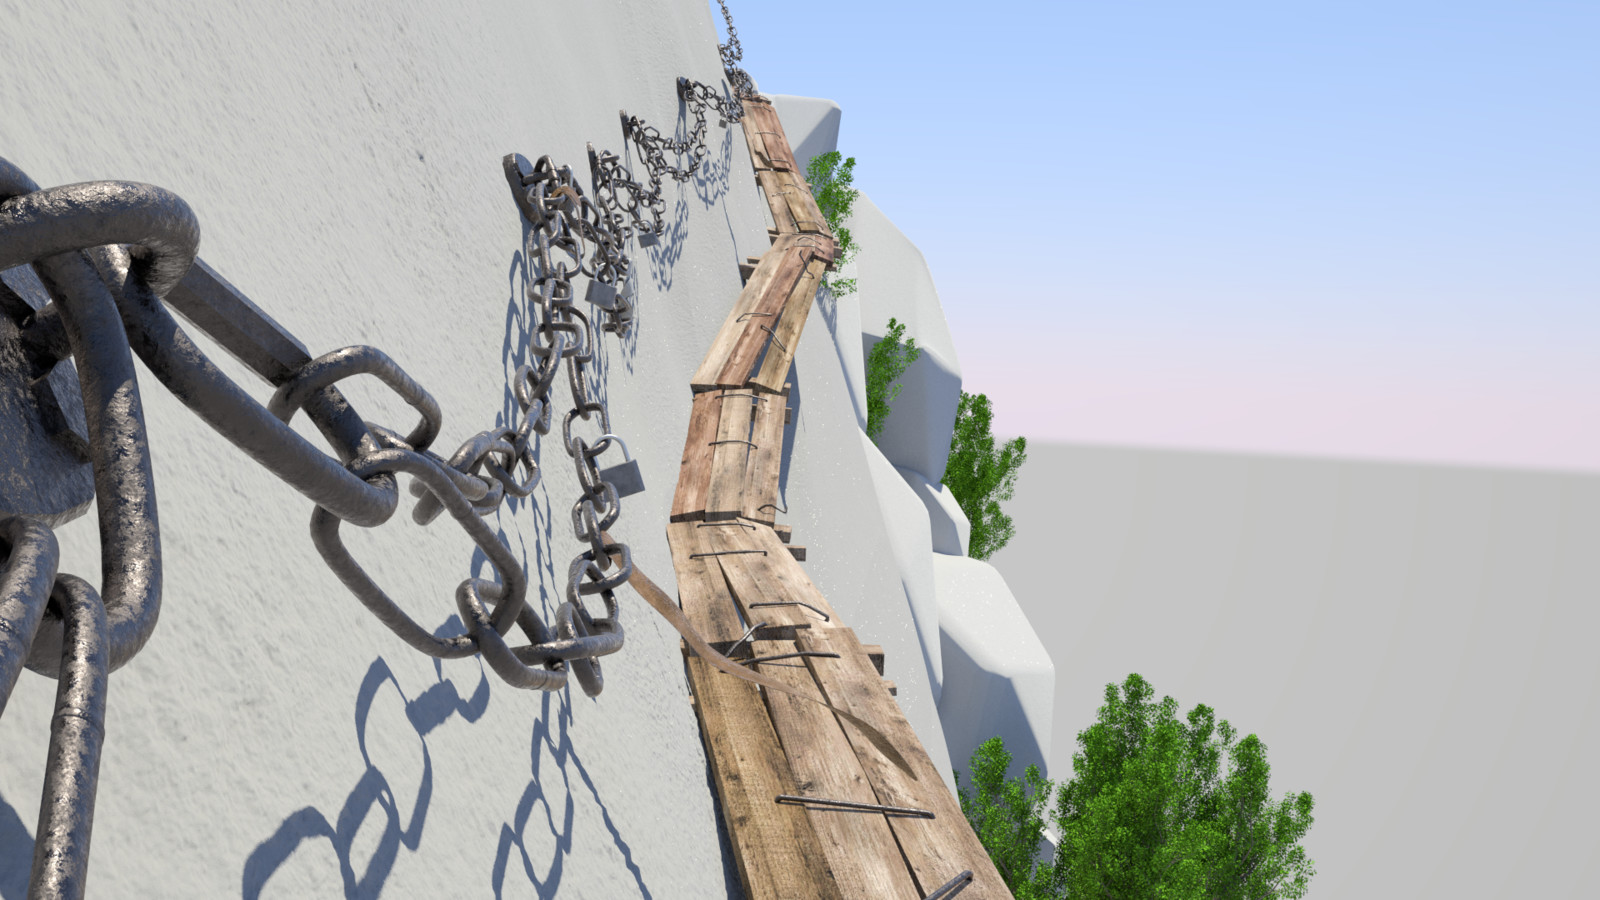 Starting to texture.  The chains are a procedural and the planks are just a single texture with different gamma nodes and layouts for each plank.